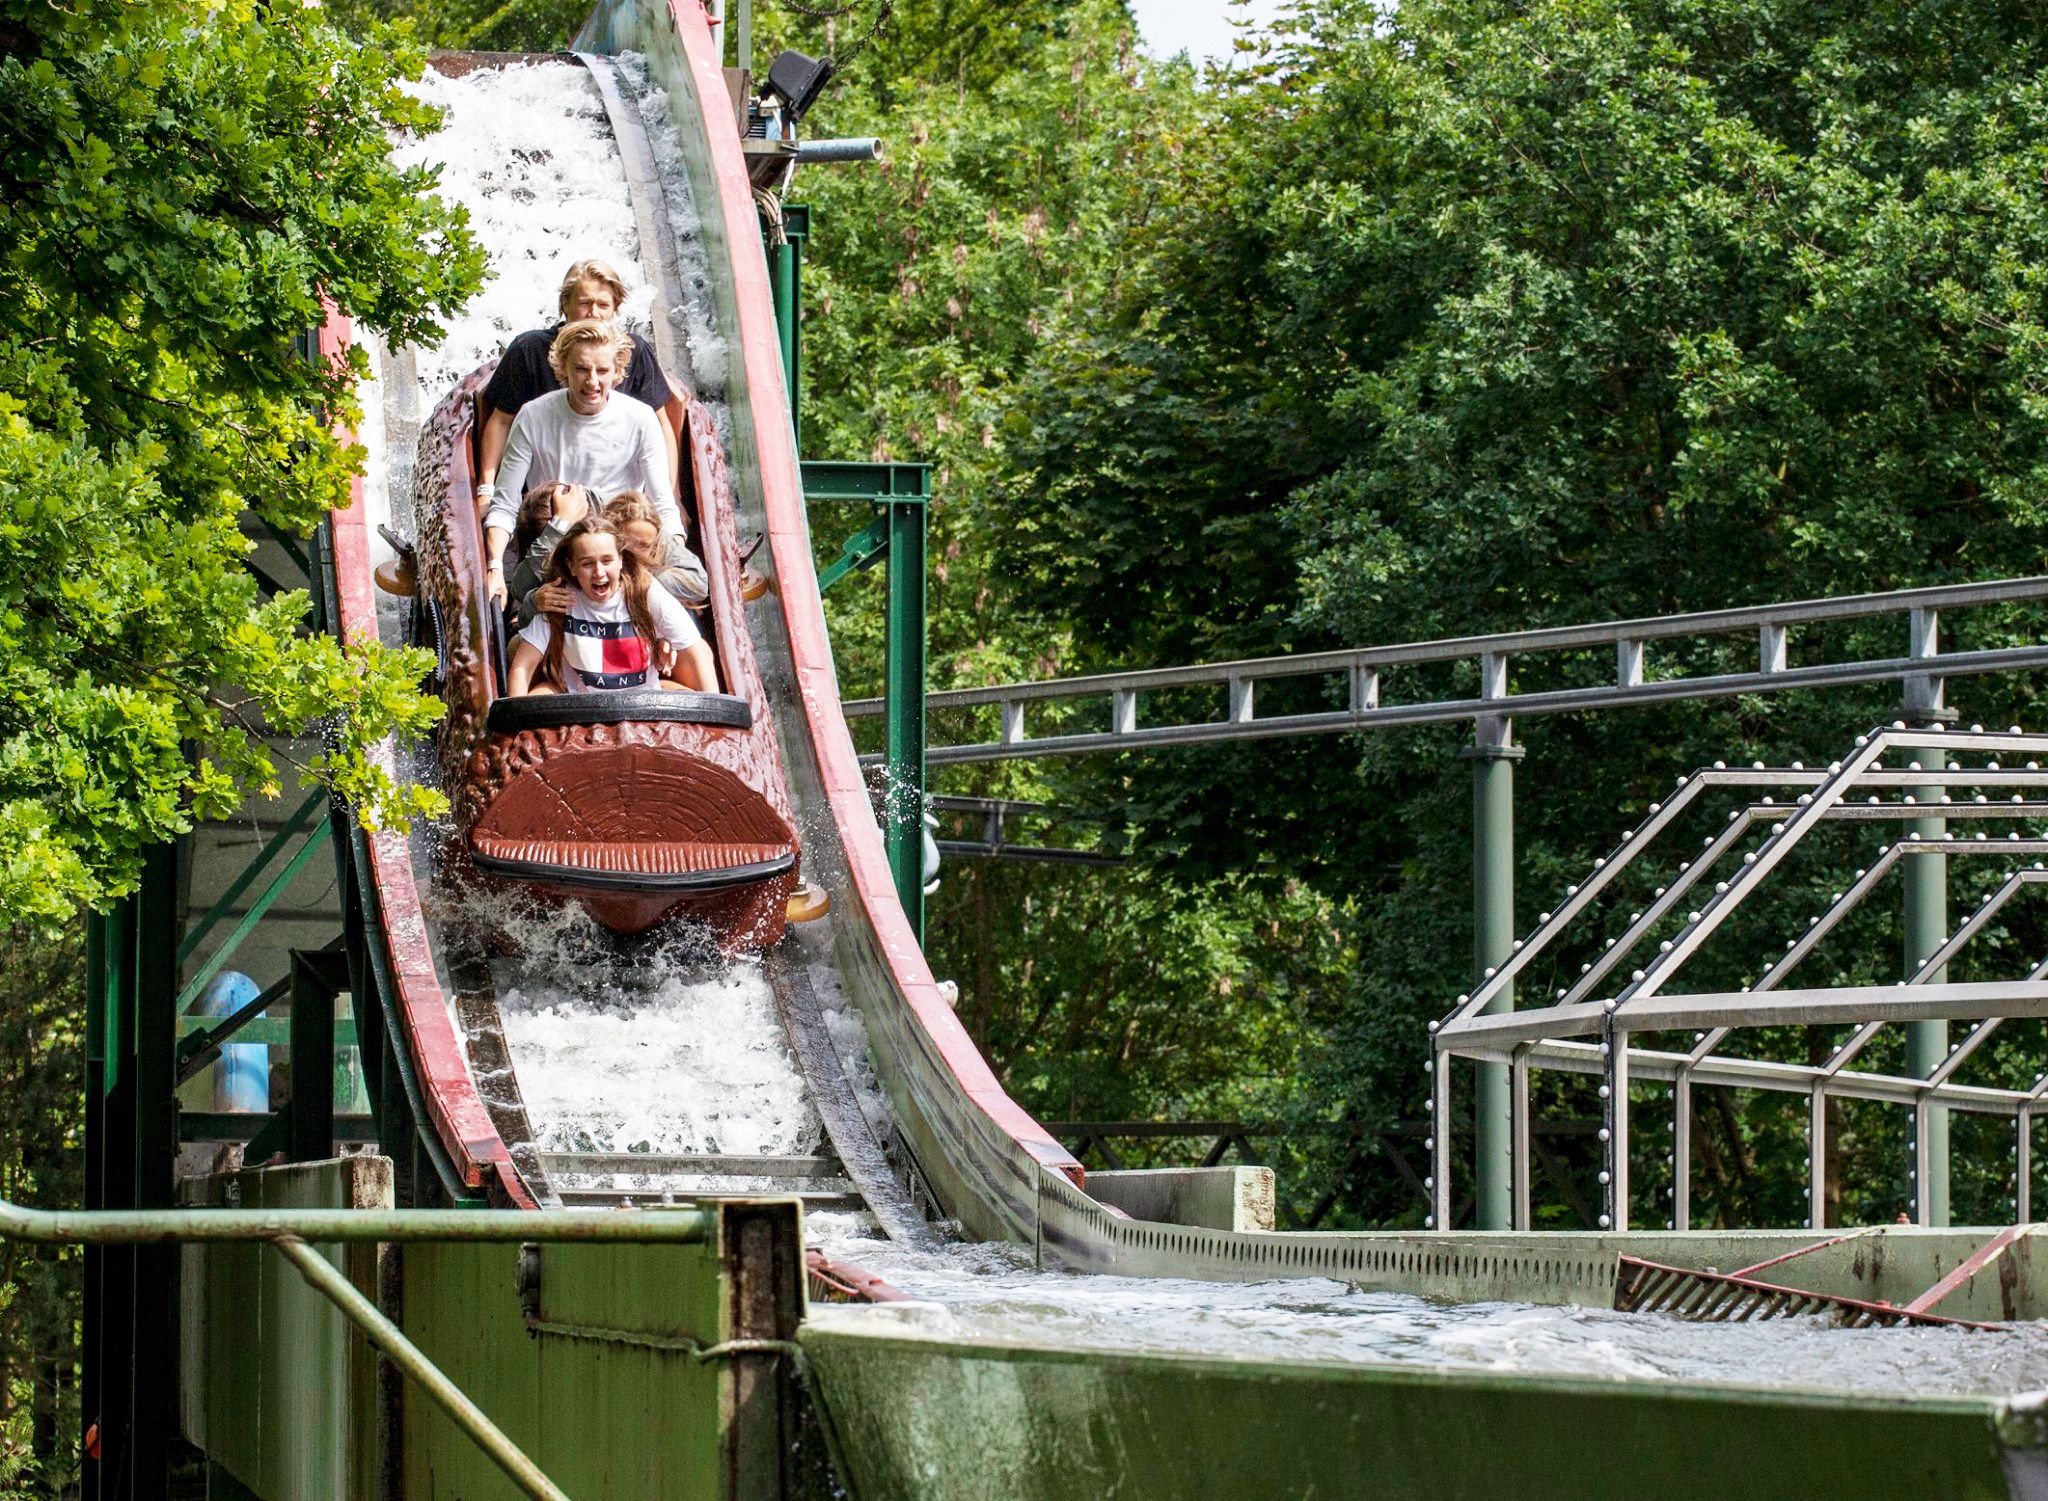 Copen ‘with the Kids: Six must-do family activities this summer